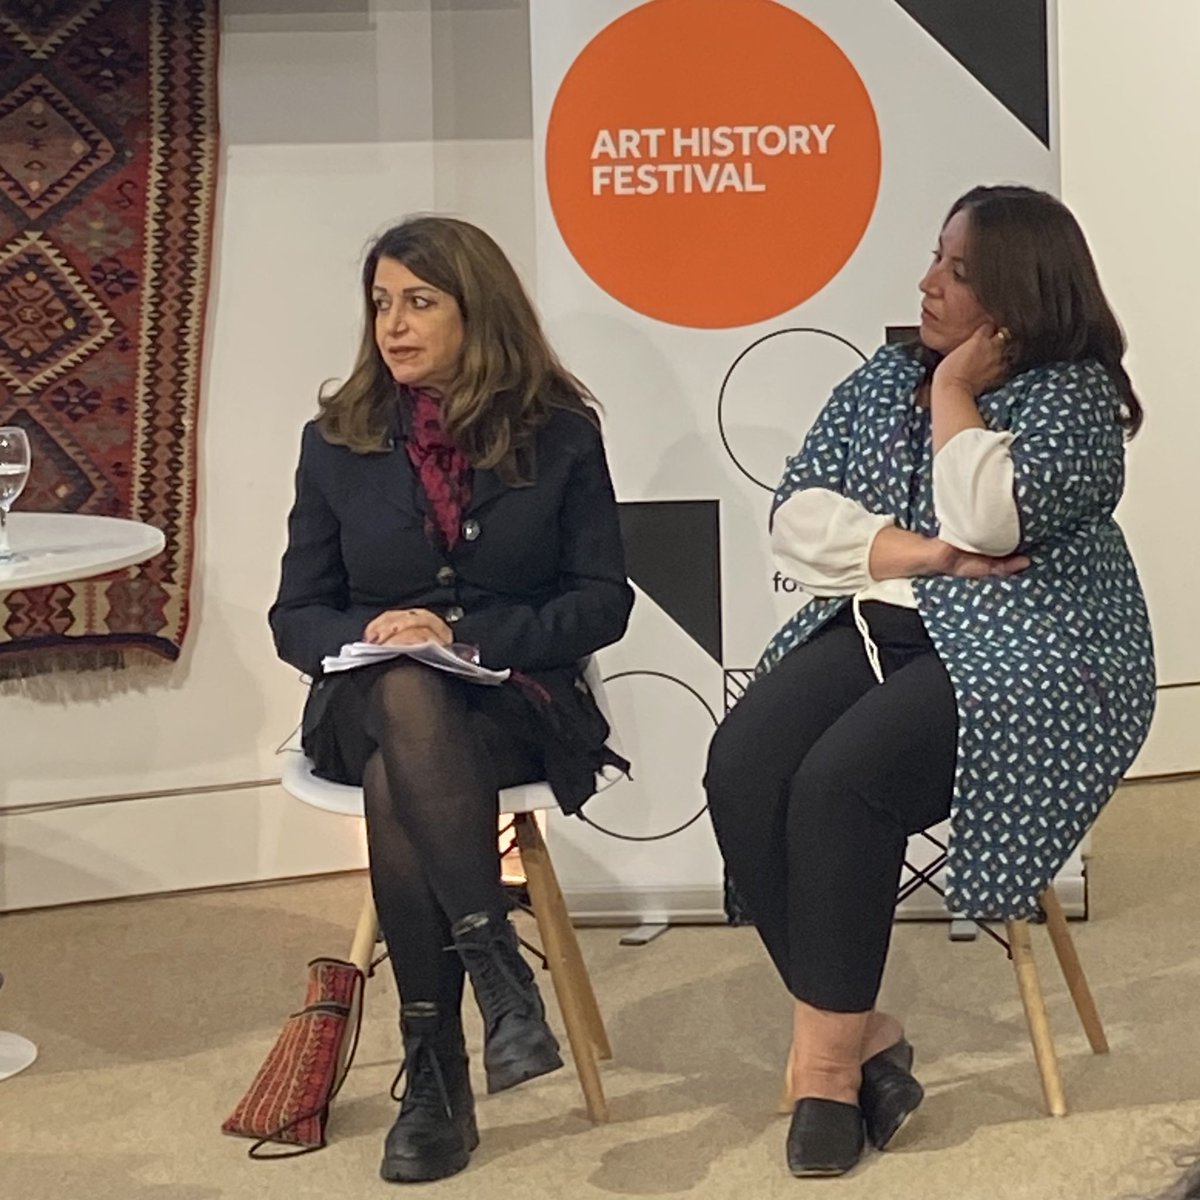 Thrilled to have spent yesterday evening in the company of @zanoubia13 of @litehouse_gall & Najlaa El-Ageli & @amldawson discussing the rich and diverse art histories of Syria & Libya - touching on impact of diaspora and political instability on cultural awareness & celebration.